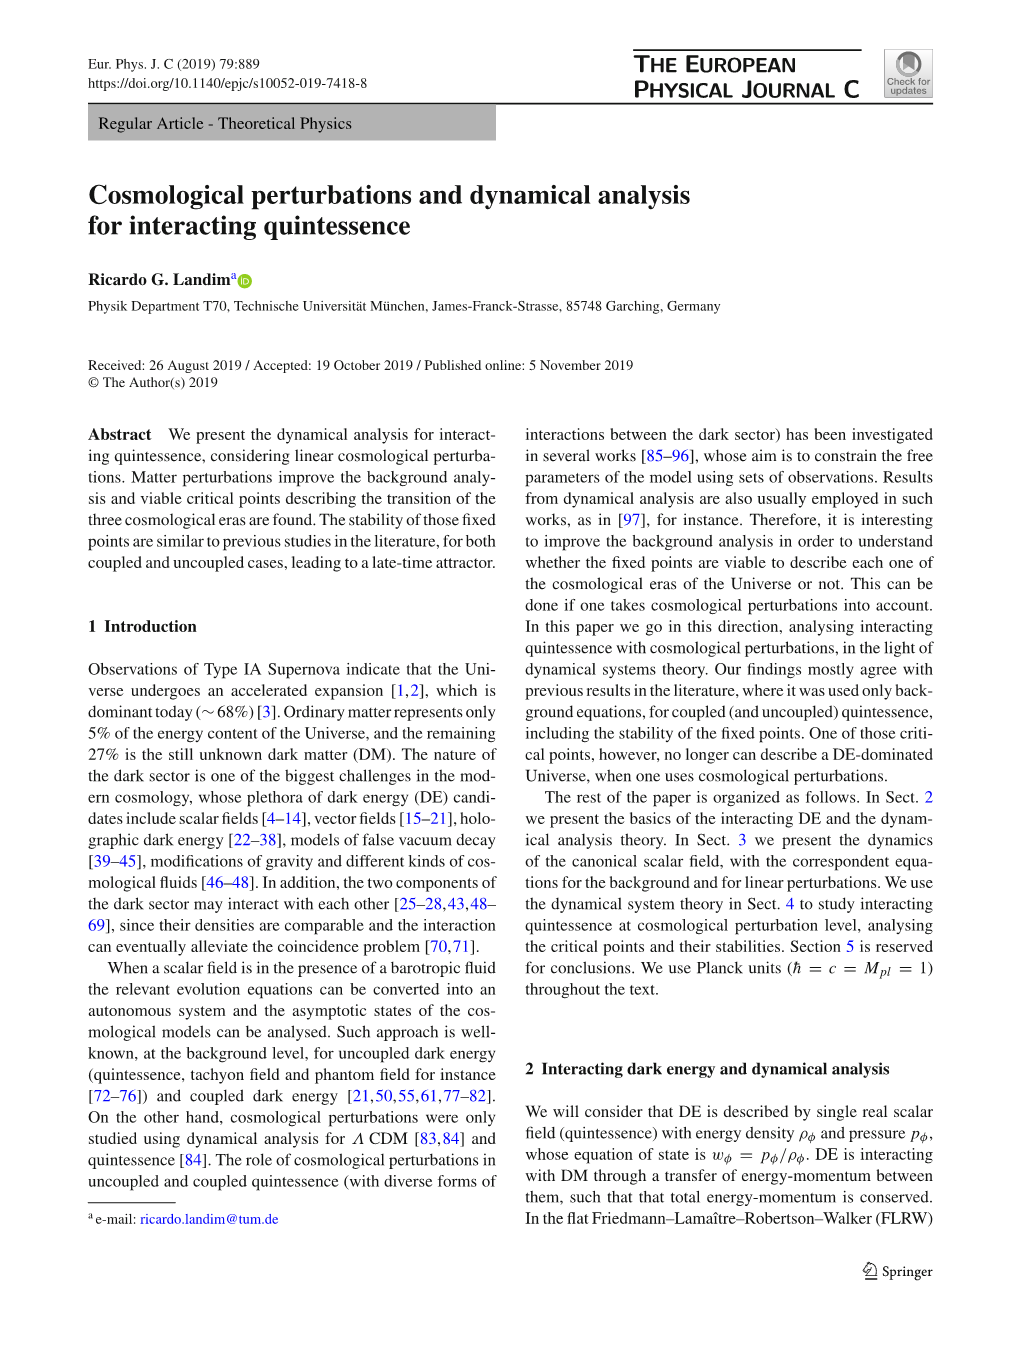 Cosmological Perturbations and Dynamical Analysis for Interacting Quintessence